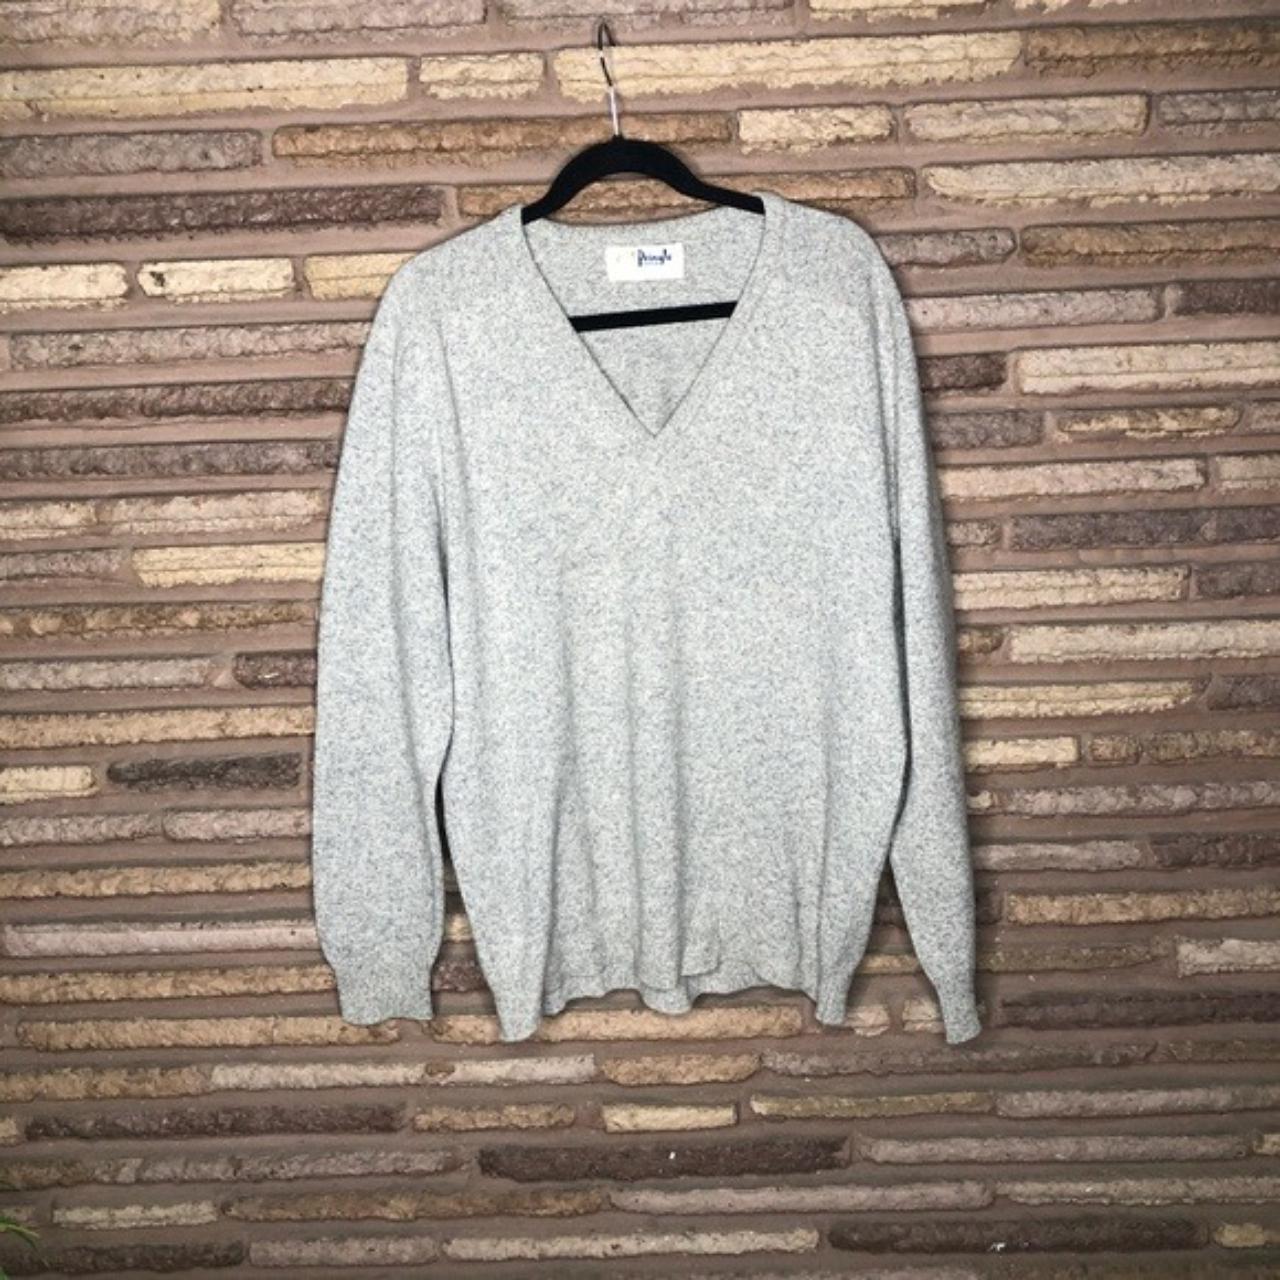 Product Image 4 - Men’s traditional heather gray V